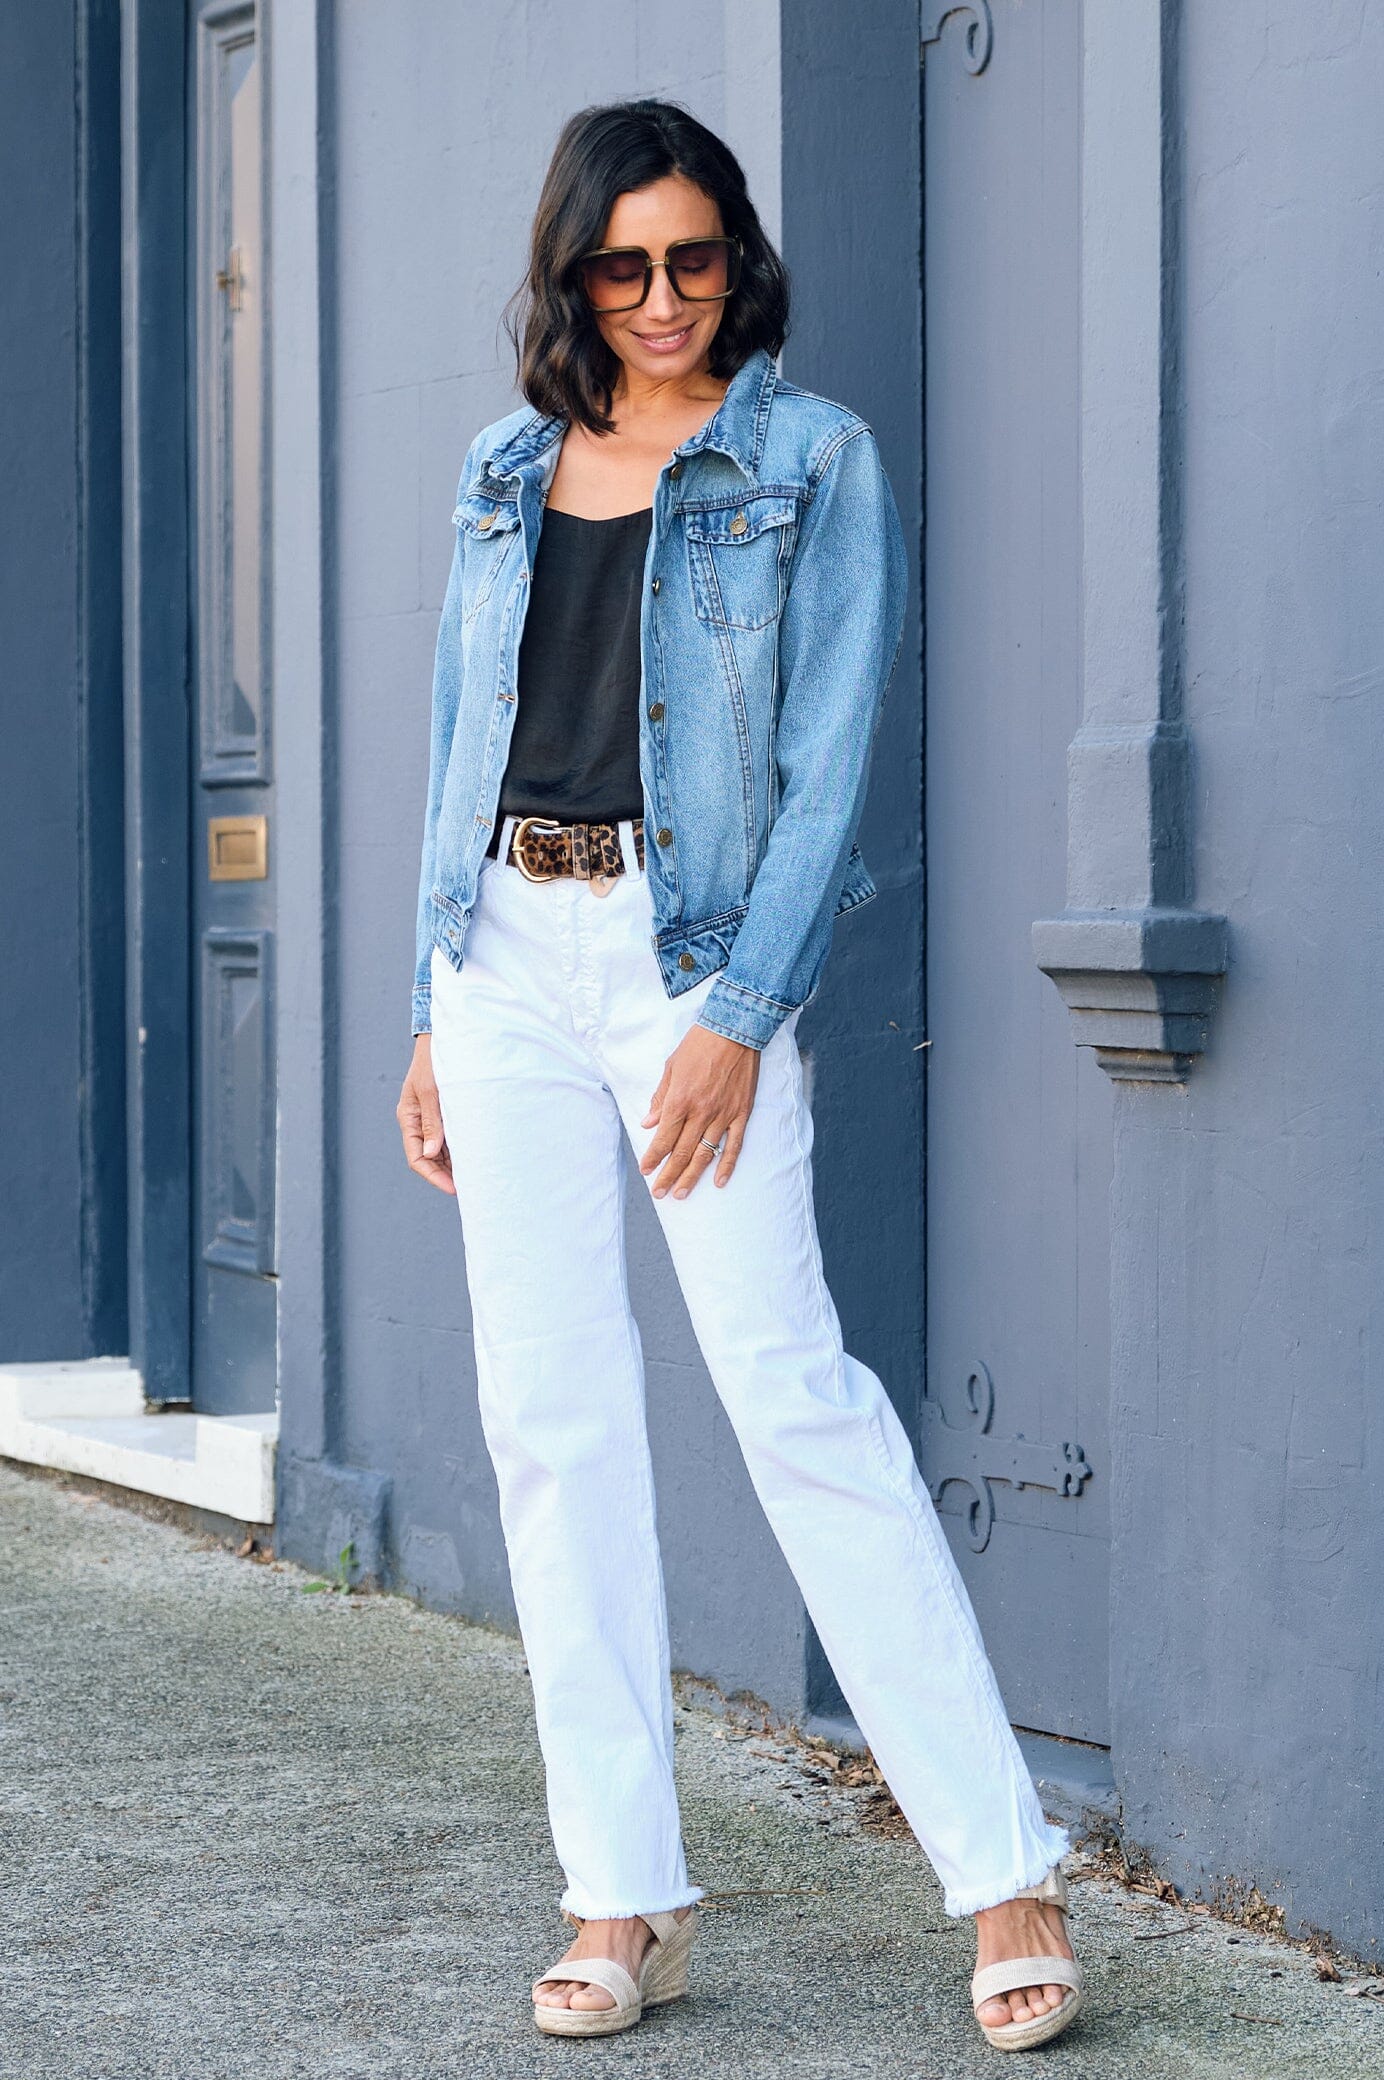 Jenna Dewan's Denim Jacket, White Jeans, and Wedge Sandals Look for Less -  The Budget Babe | Affordable Fashion & Style Blog